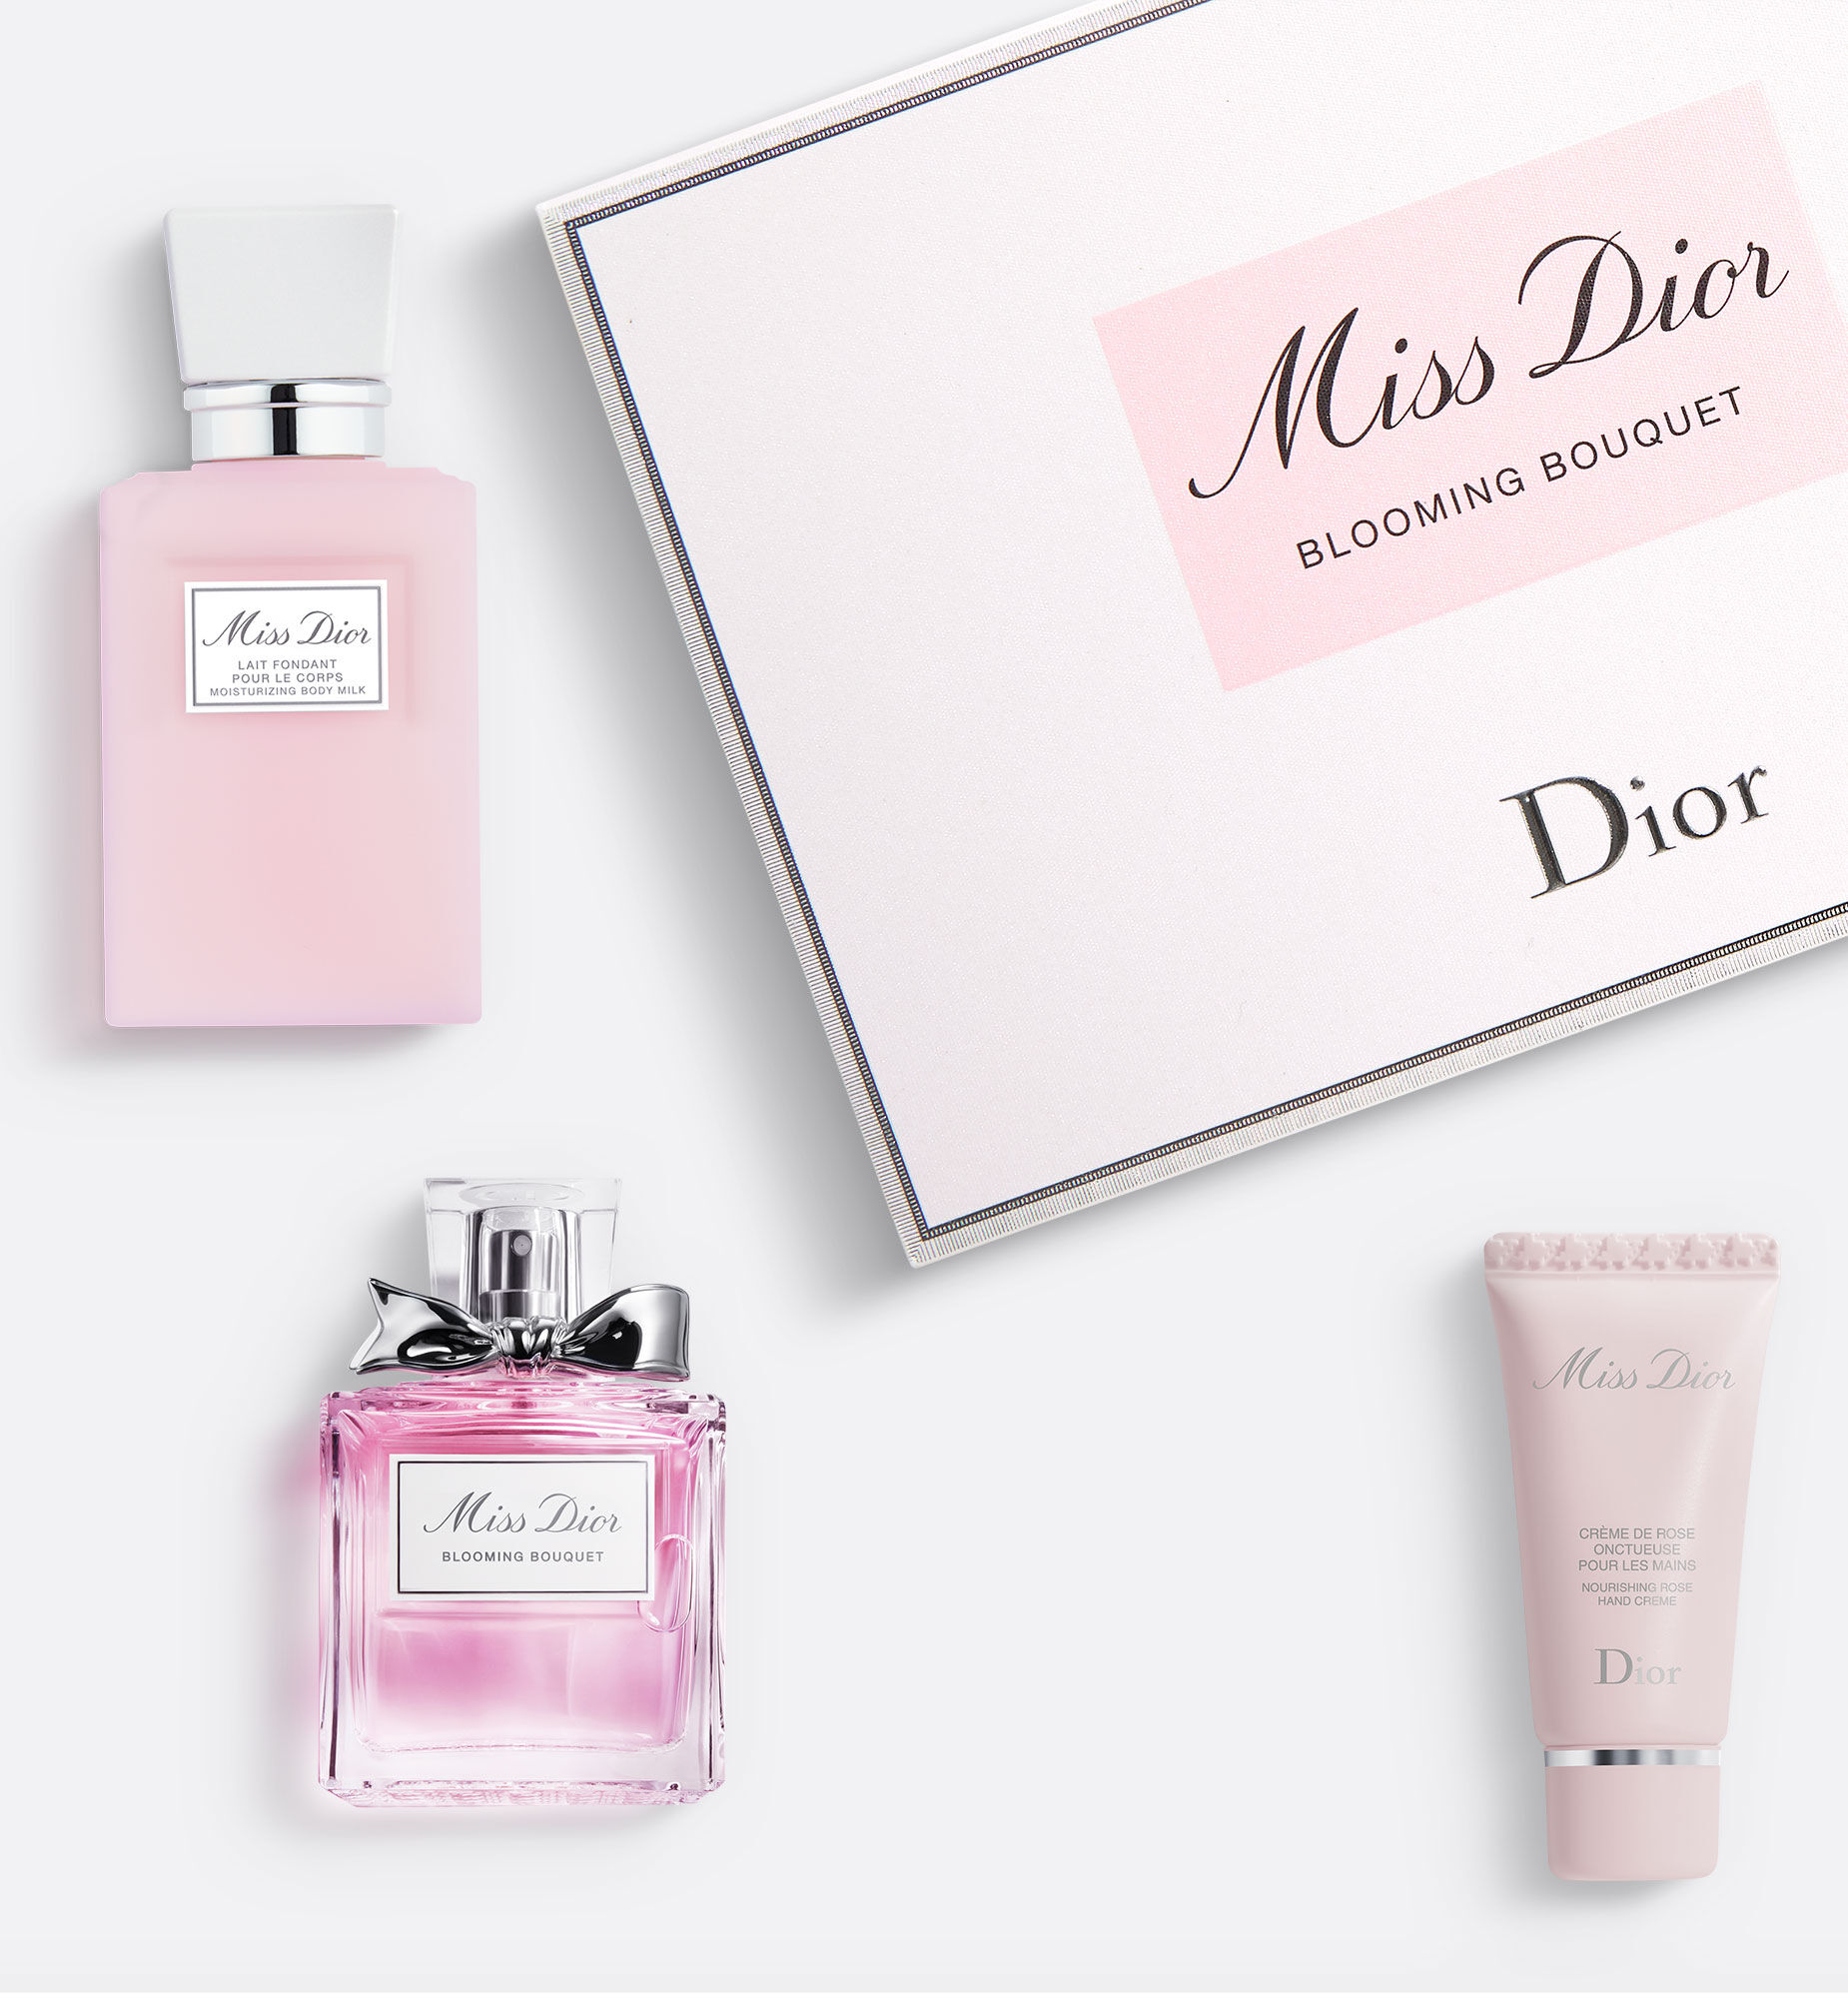 Dior Beauty 3piece Free Bonus Gift with 3 Dior Beauty Products Purchase at  Macys  details at MakeupBonusescom DiorBeau  Dior beauty Dior makeup  Free makeup